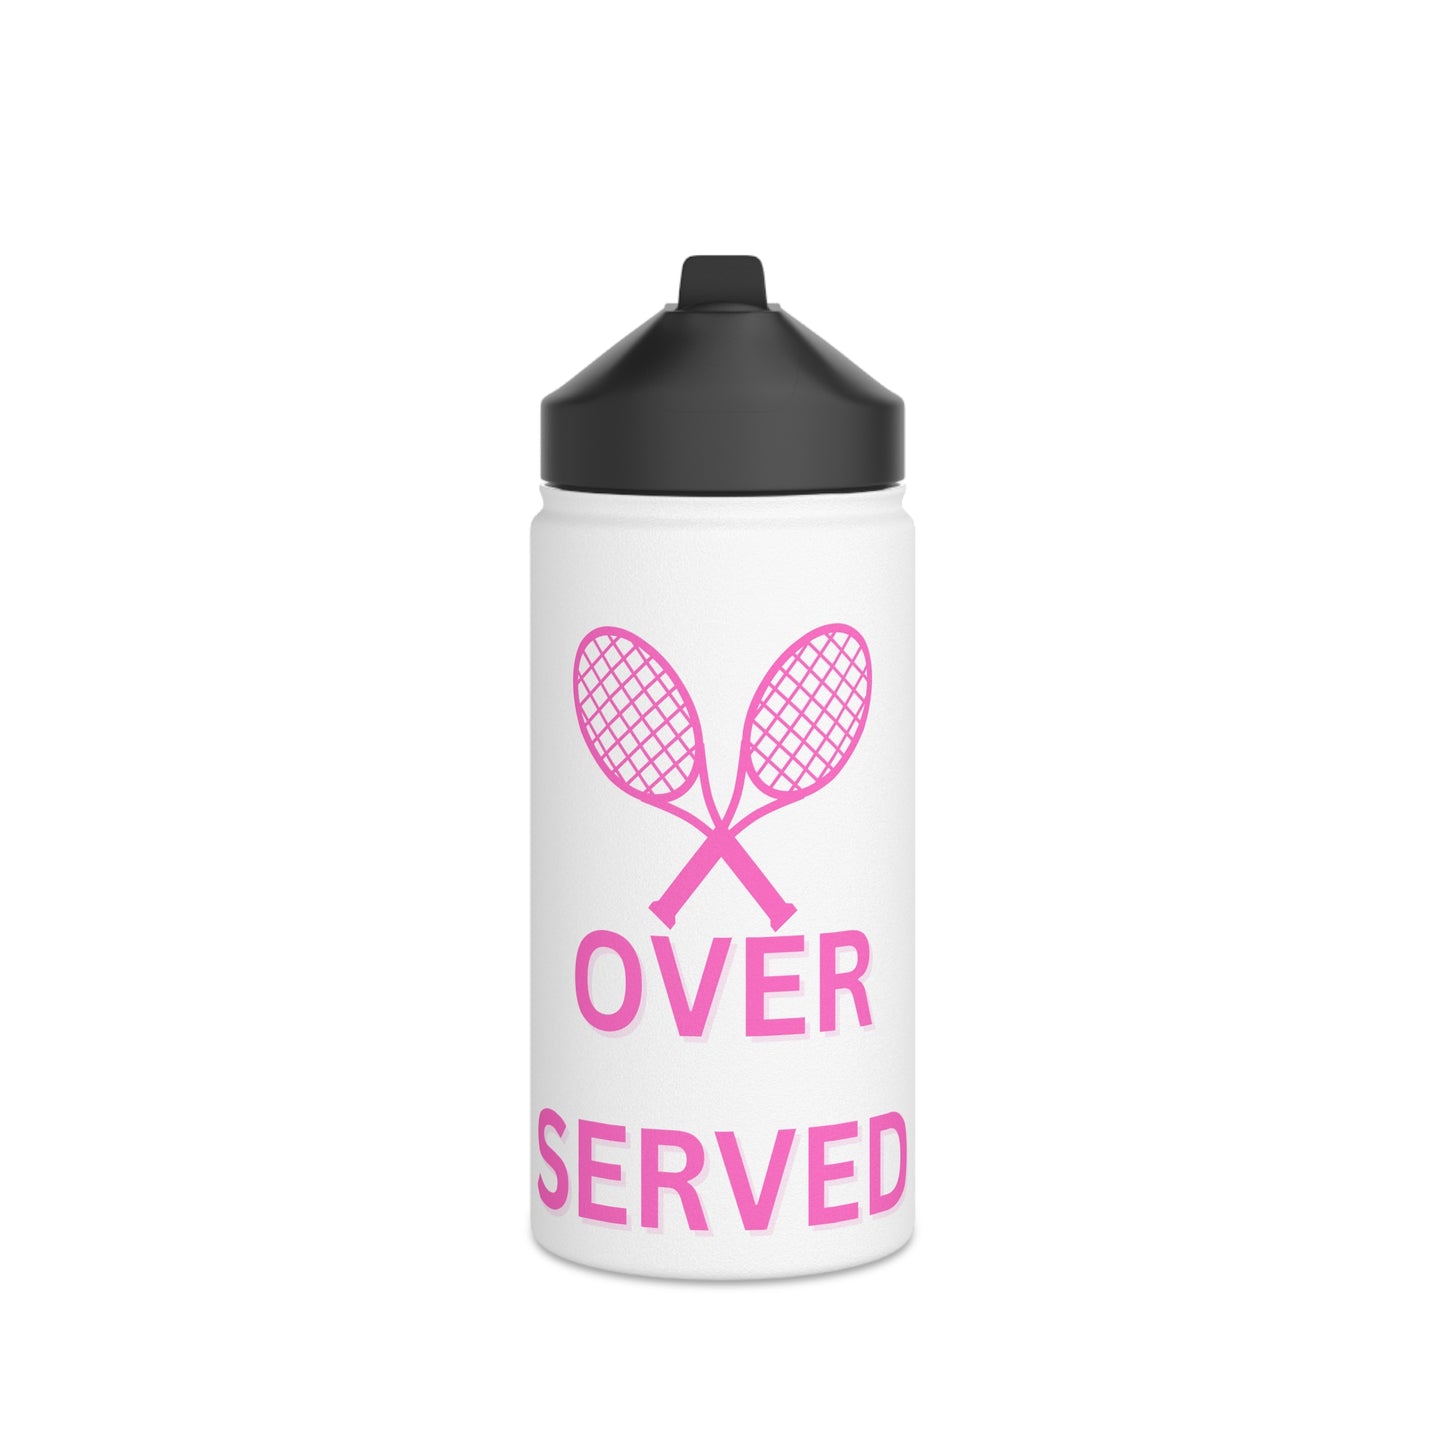 Over Served tennis water bottle